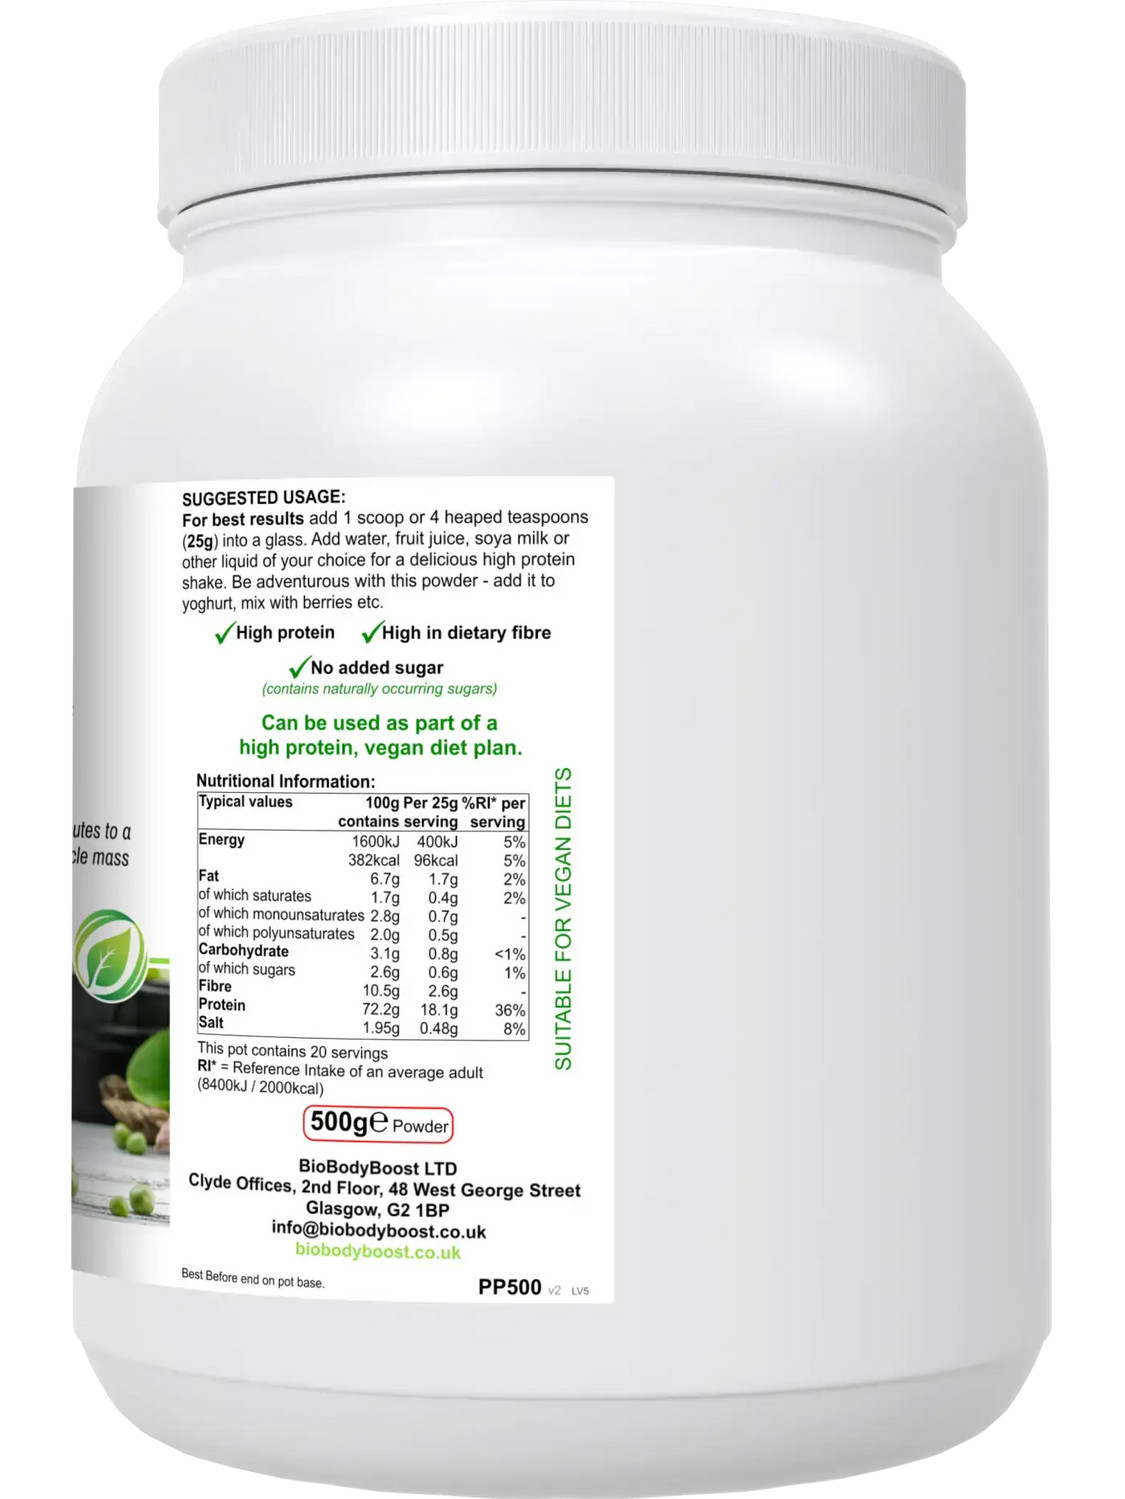 PeaPro High Protein Fibre Pea Powder - Nutrition Drinks & Shakes